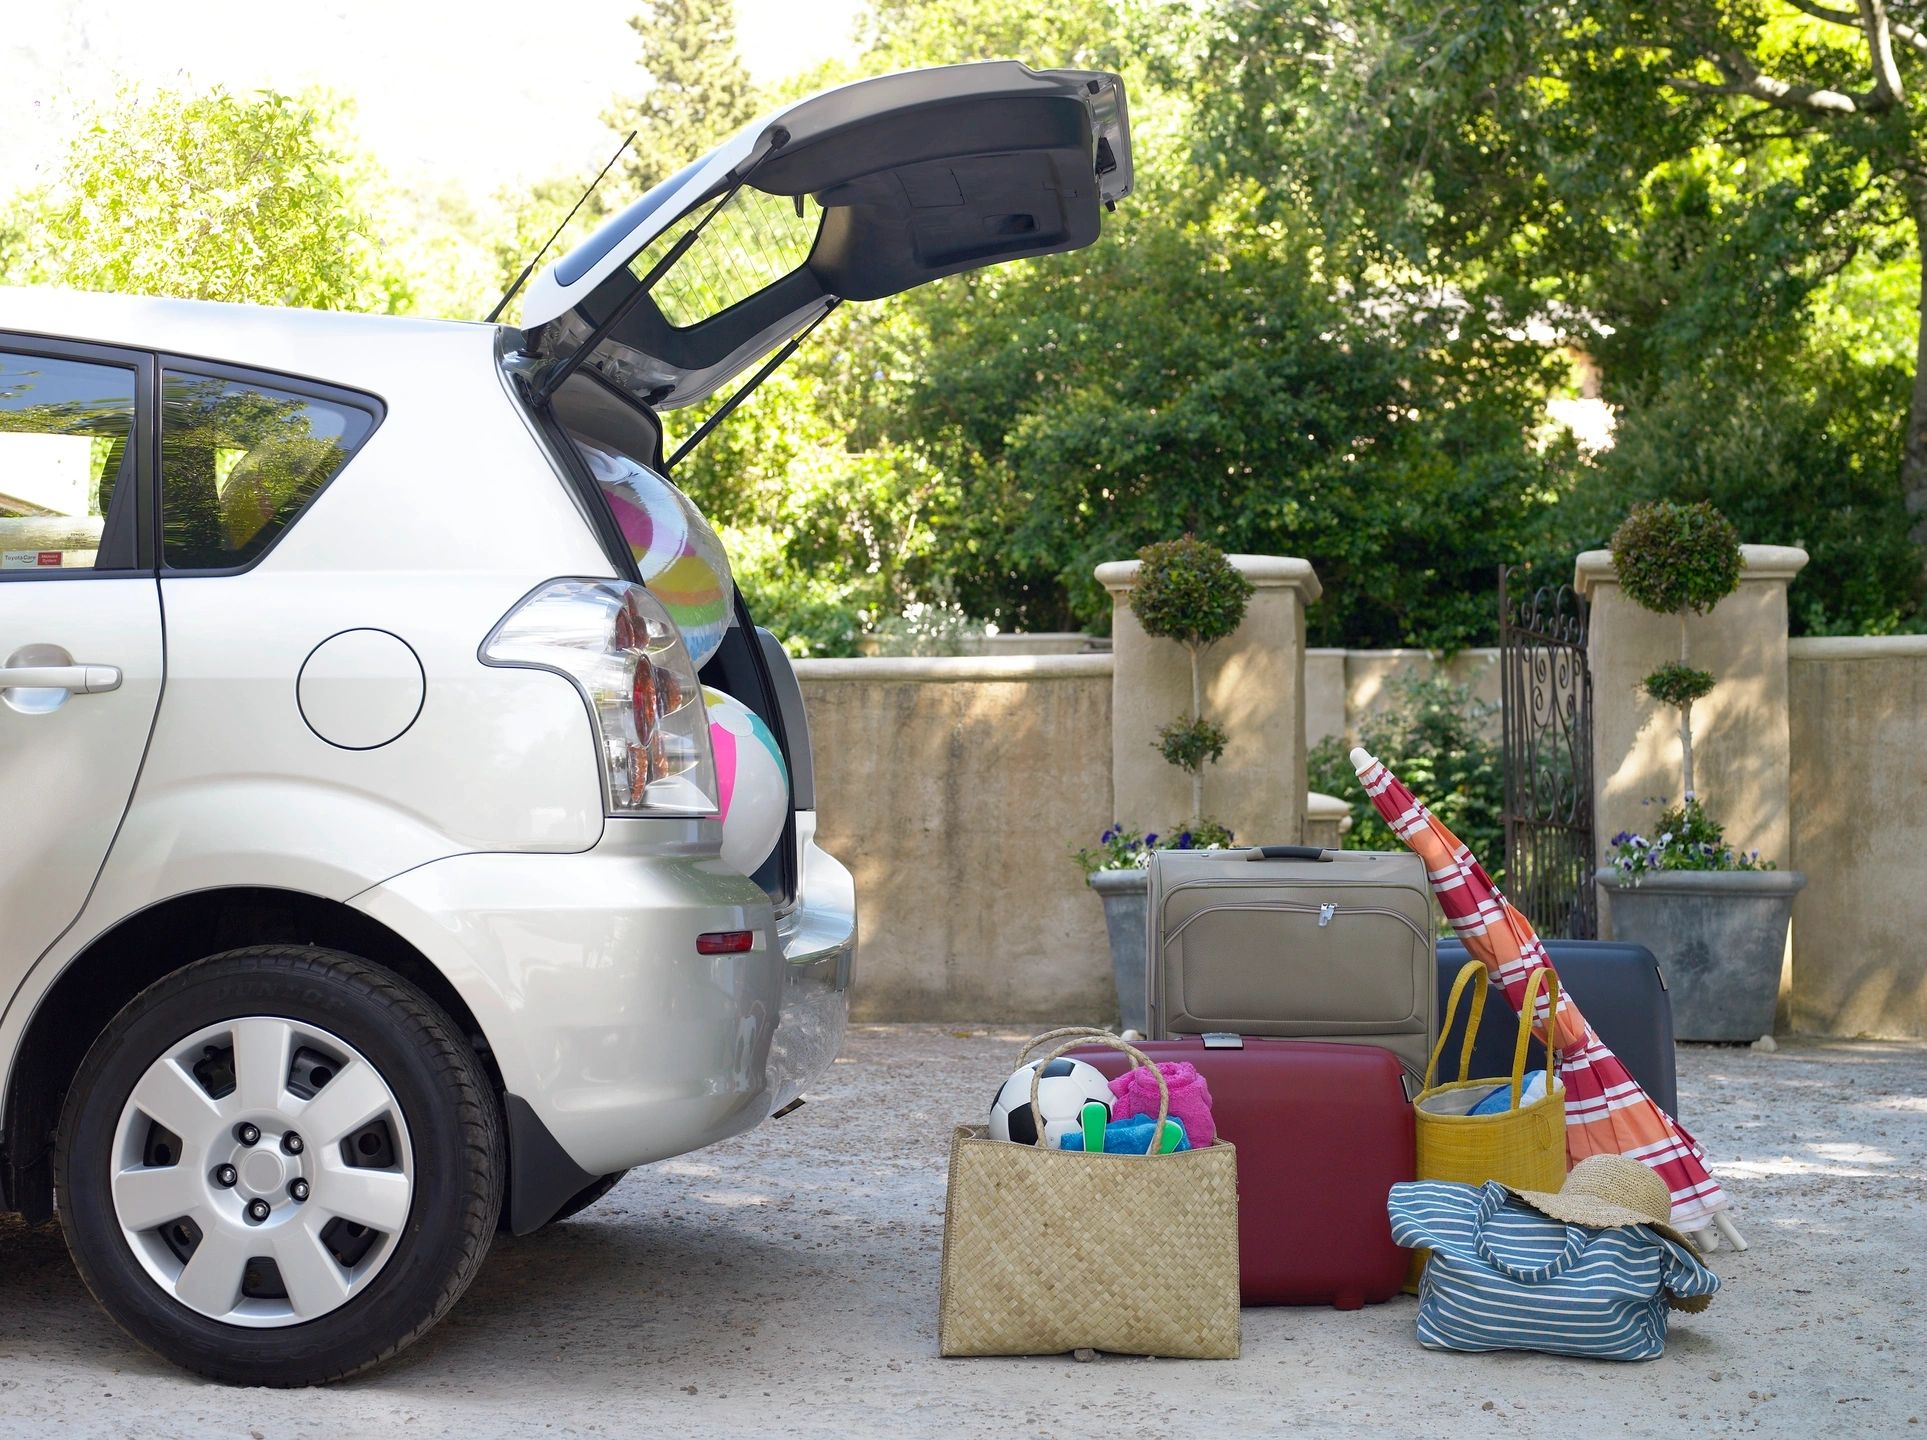 Family Road Trip Safety Checklist: Essential Tips for Traveling with Kids